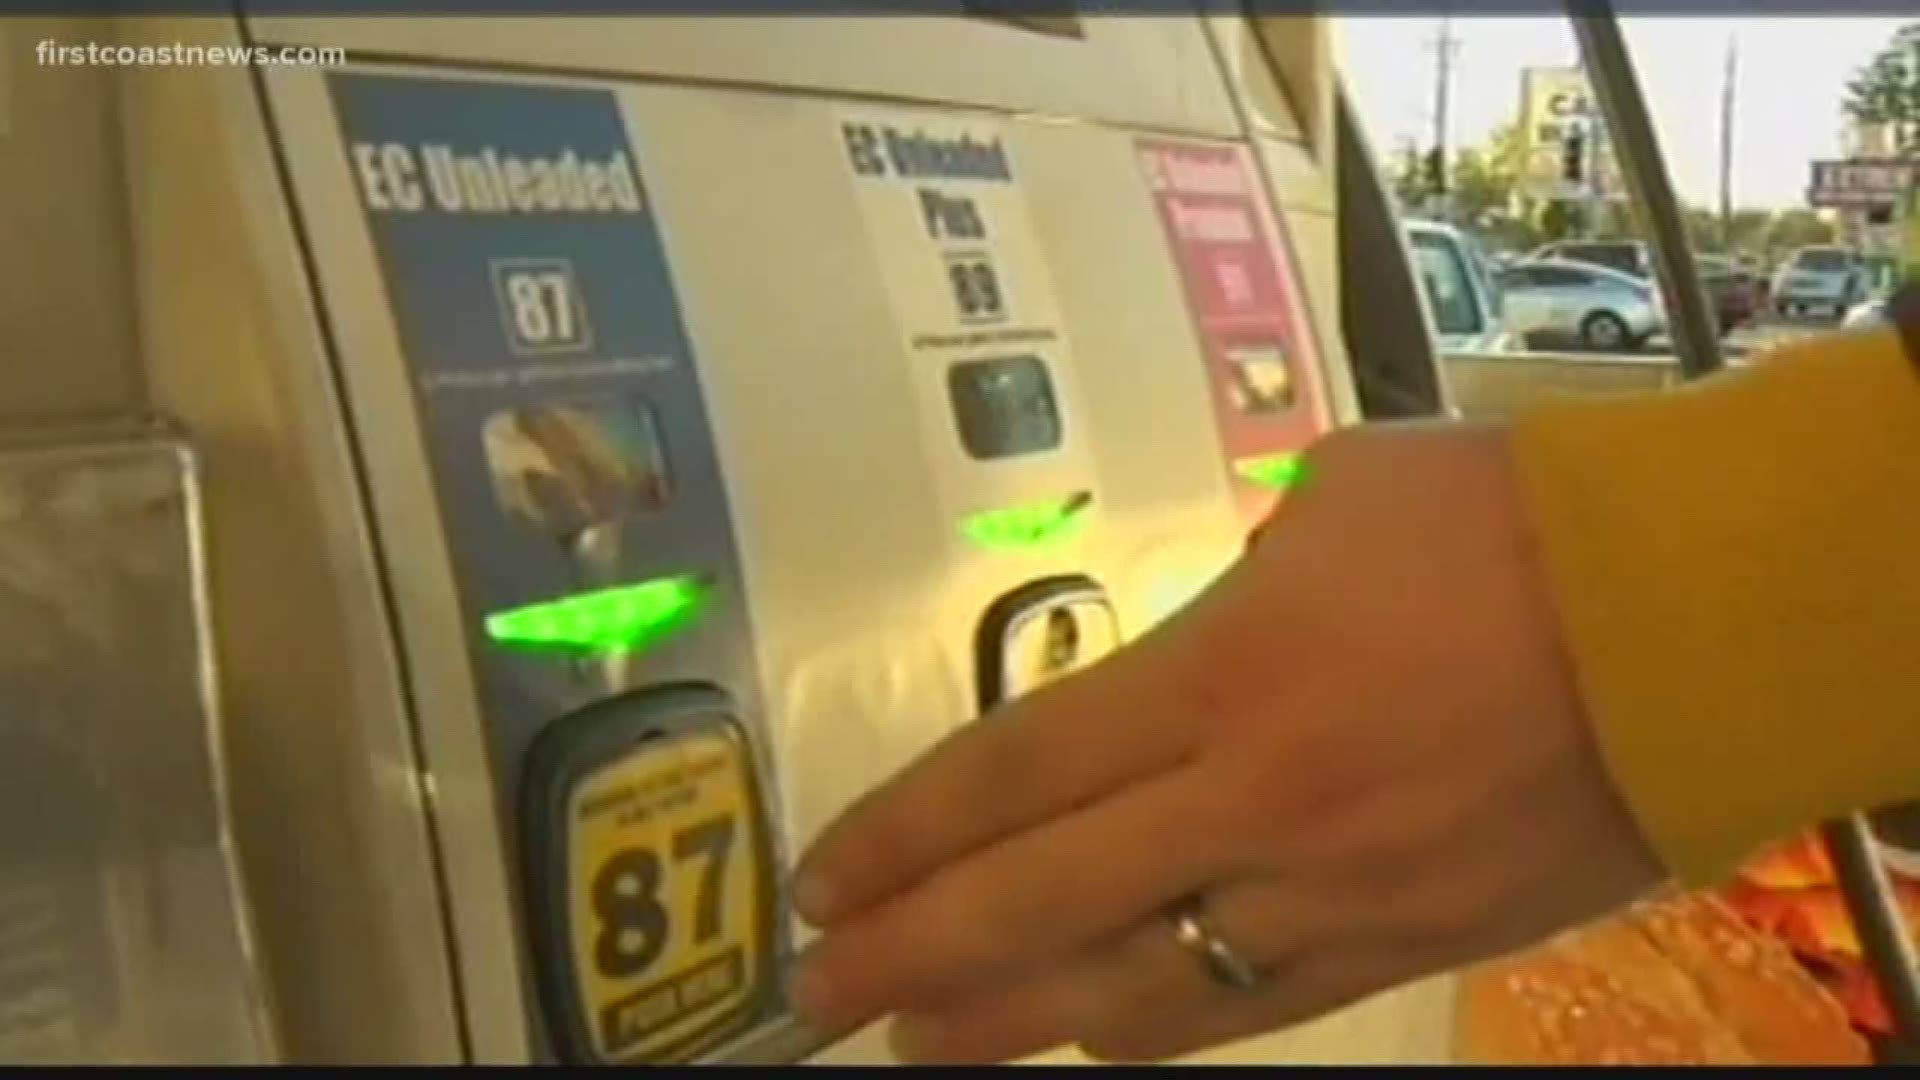 FCN's Lana Harris explores what factors may be leading to wasting gas when driving.